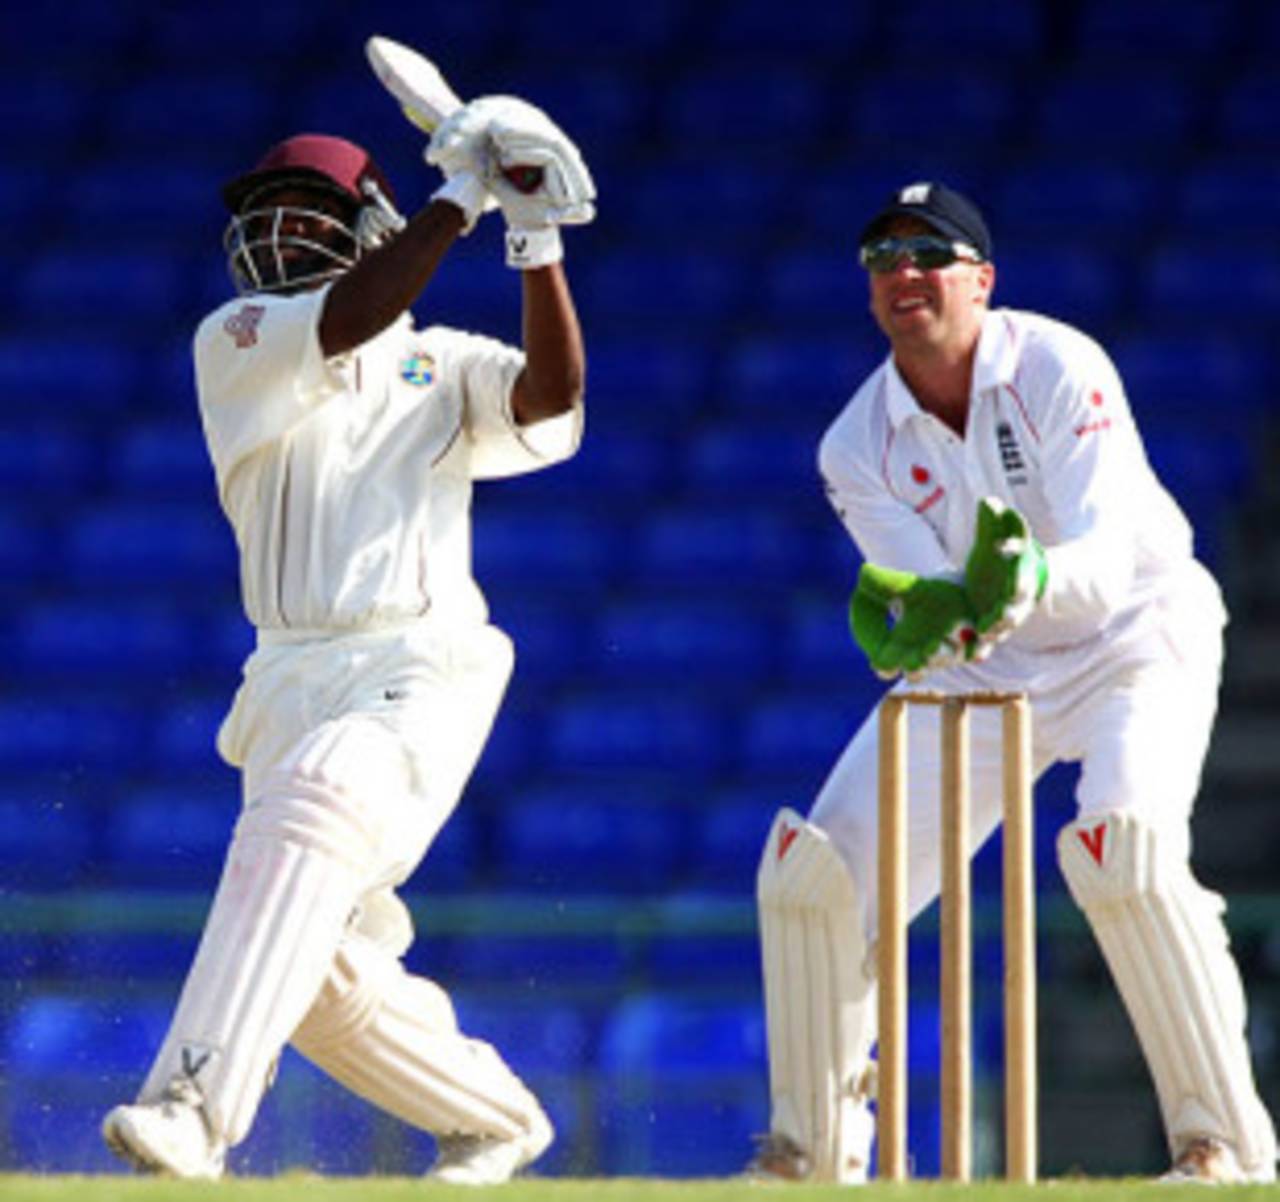 Adrian Barath clears the infield , West Indies A v England XI, St Kitts, January 29, 2009